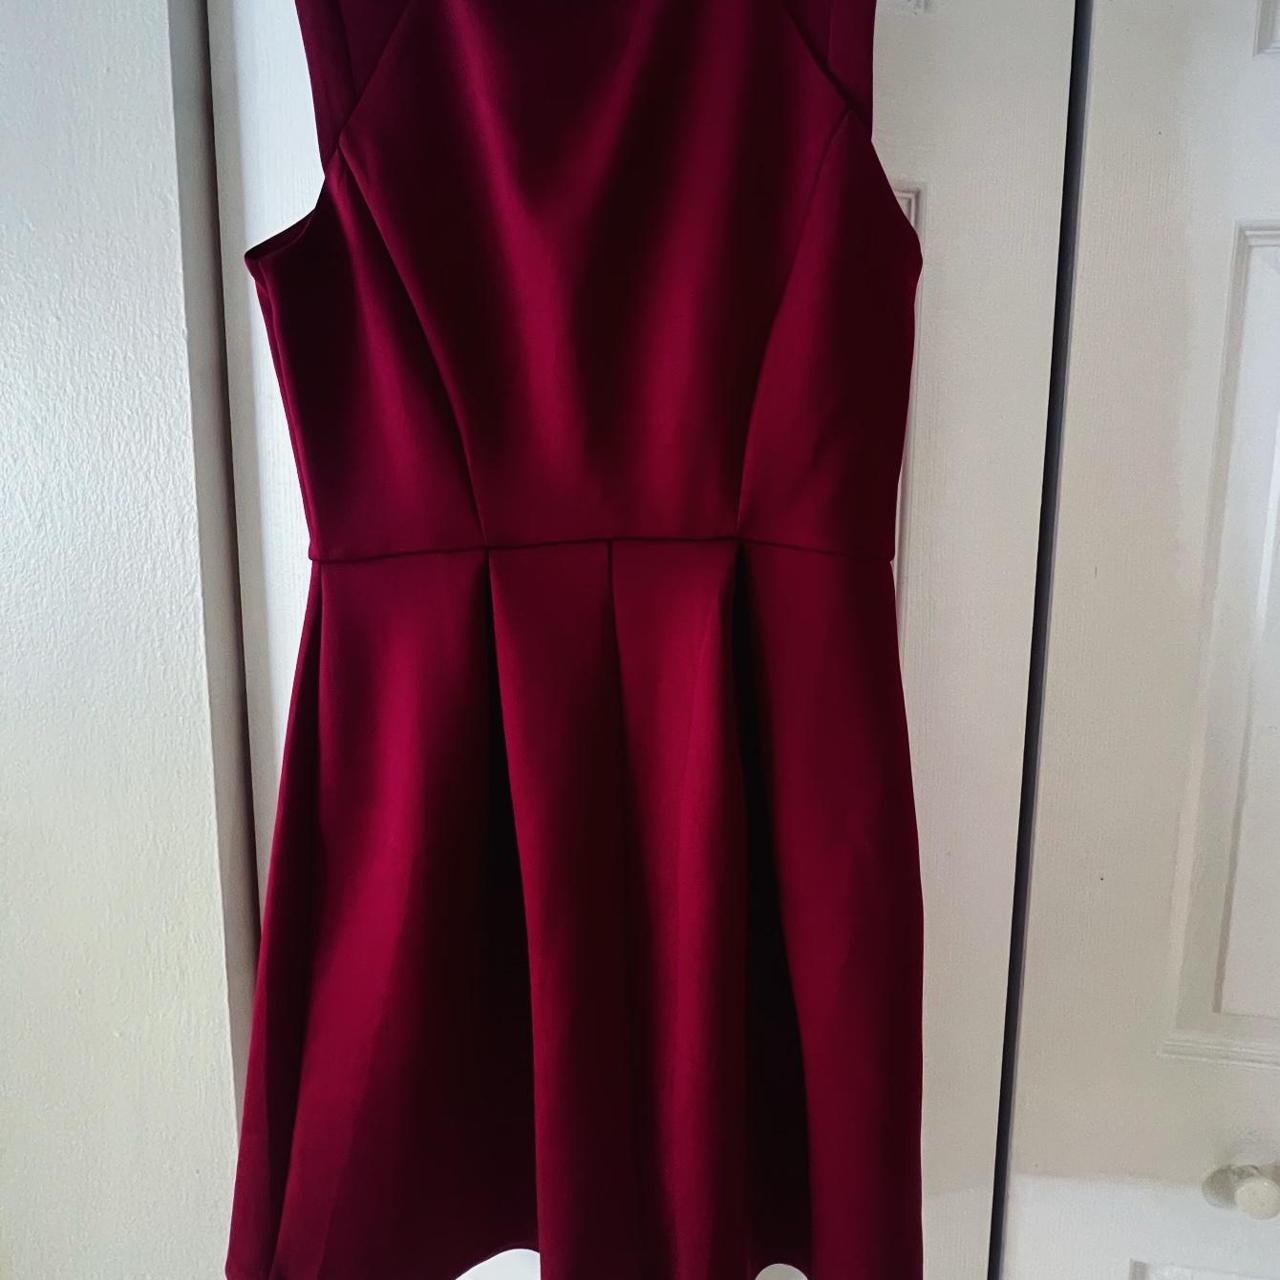 Product Image 3 - Burgundy Knee Length Bell Shaped